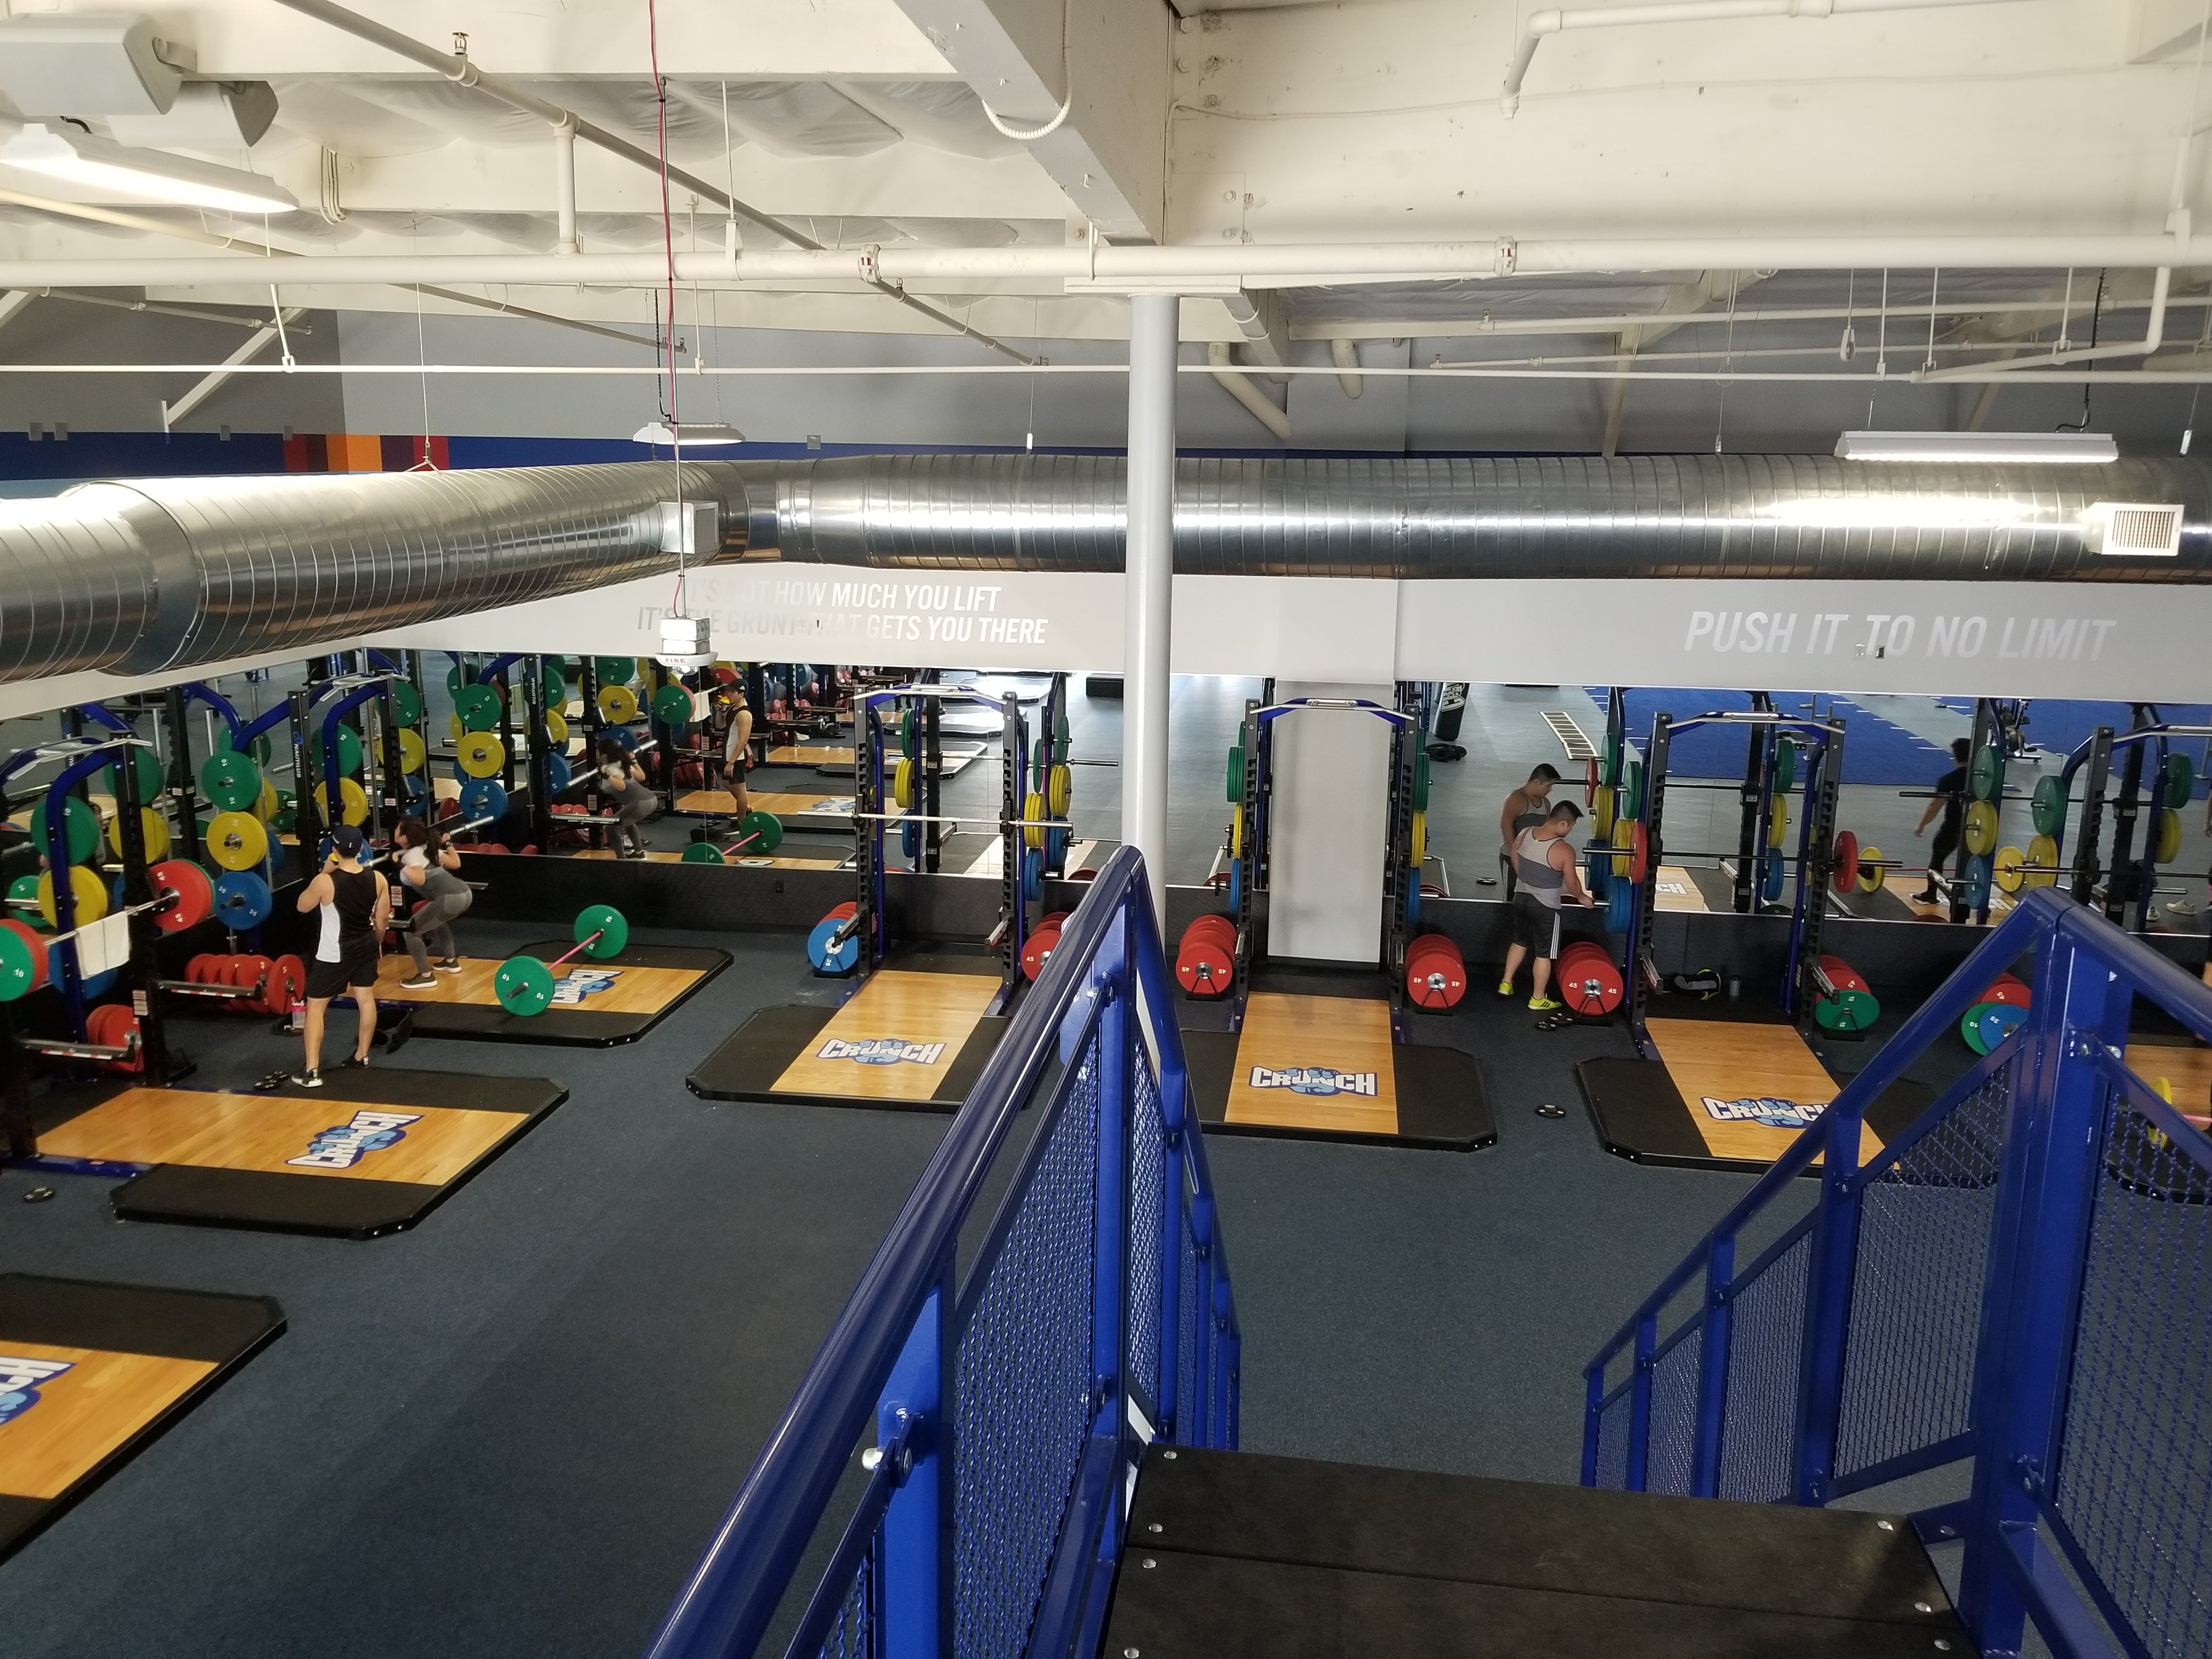 Core Health Fitness On Twitter Check Out The New Crunch Facility In Garden Grove Ca This 40000 Sq Ft Facility Features Brand New Star Trac Stairmaster And Nautilus Equipment If You